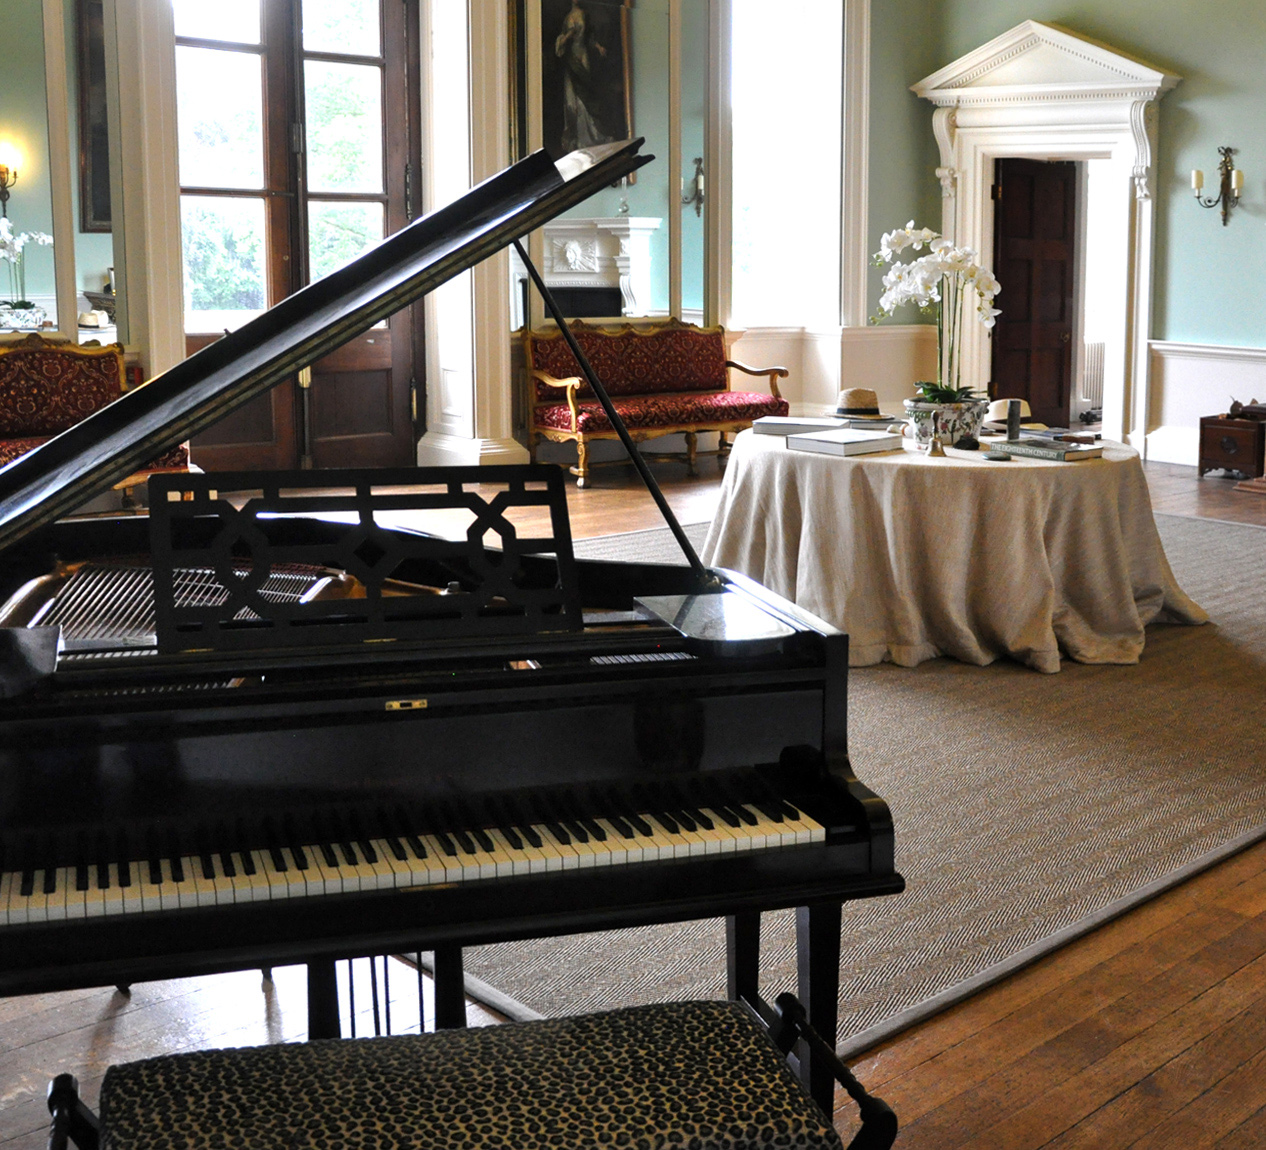 Piano in the Saloon at Kirtlington Park